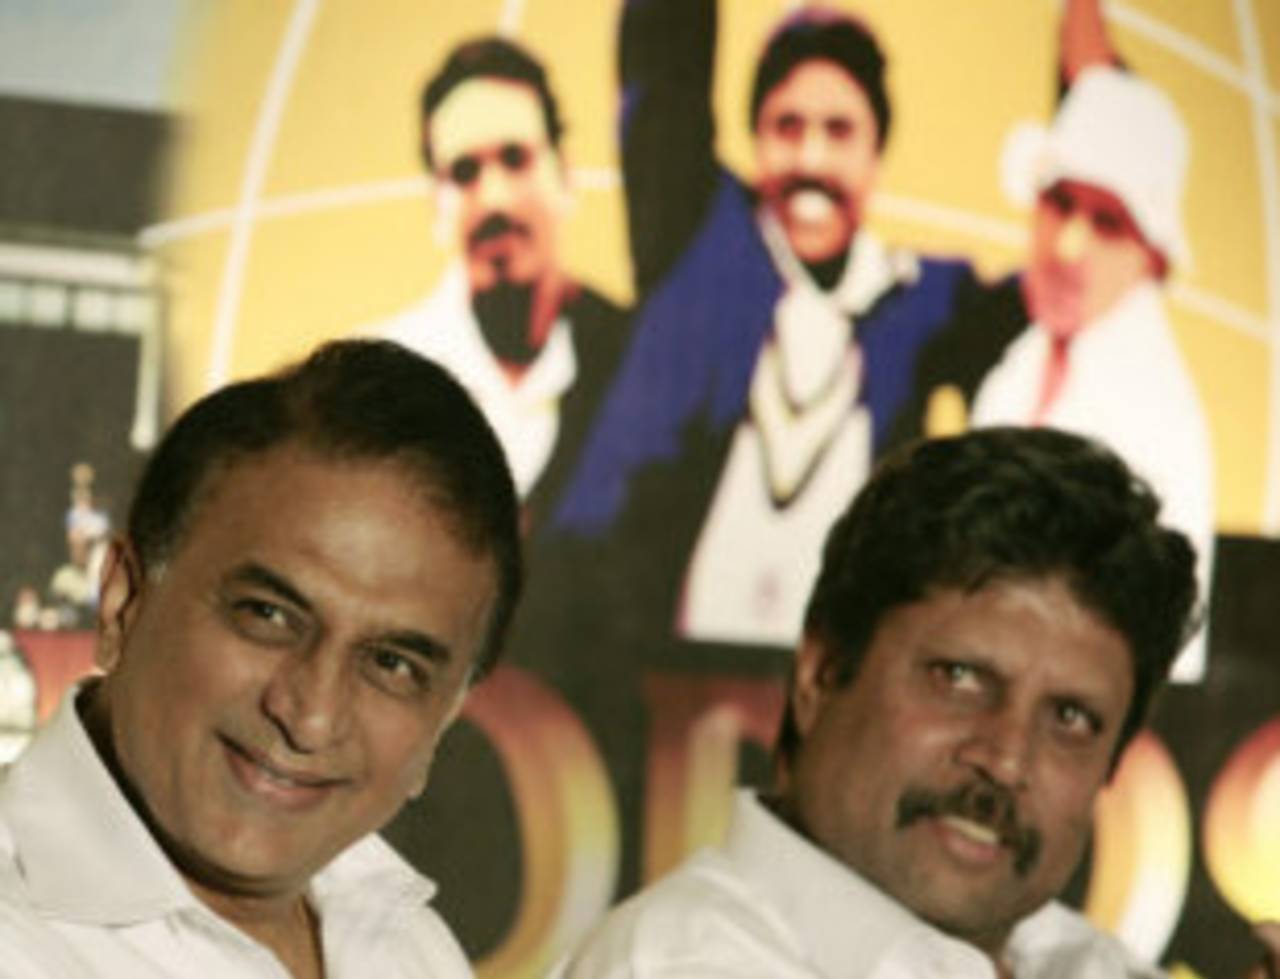 Sunil Gavaskar and Kapil Dev at a function celebrating the silver jubilee of the 1983 World Cup win, Bangalore, June 3, 2008